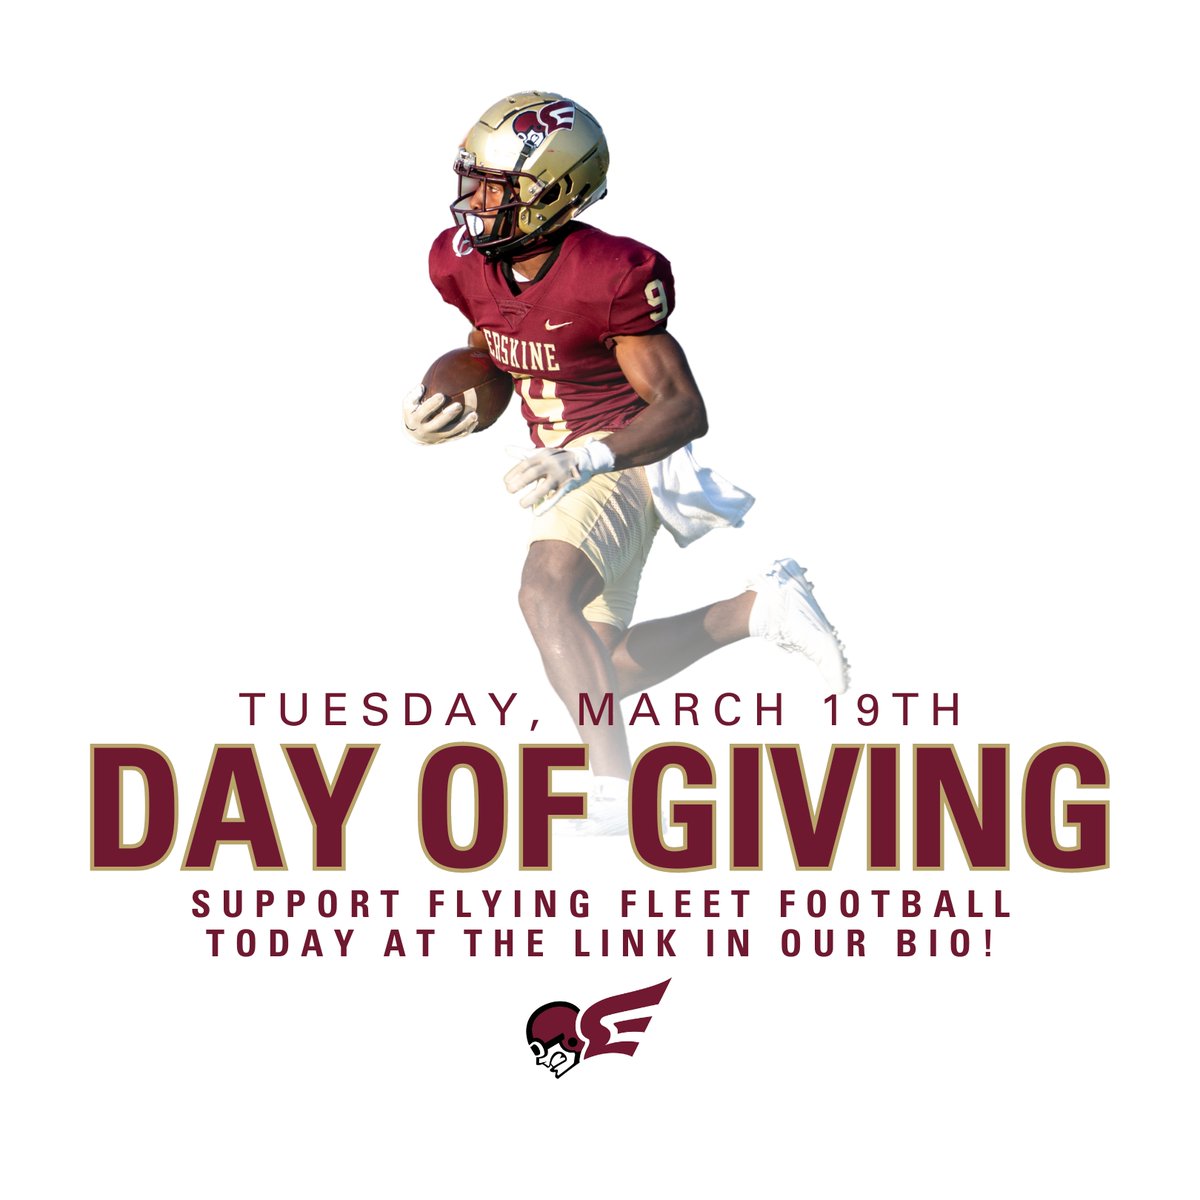 Today is the Erskine College Day of Giving and we hope that you will support us by clicking the link below and selecting FOOTBALL in the designation drop-down when you give! Thank you for supporting Erskine Football! nam02.safelinks.protection.outlook.com/?url=https%3A%…

#WeAreErskine